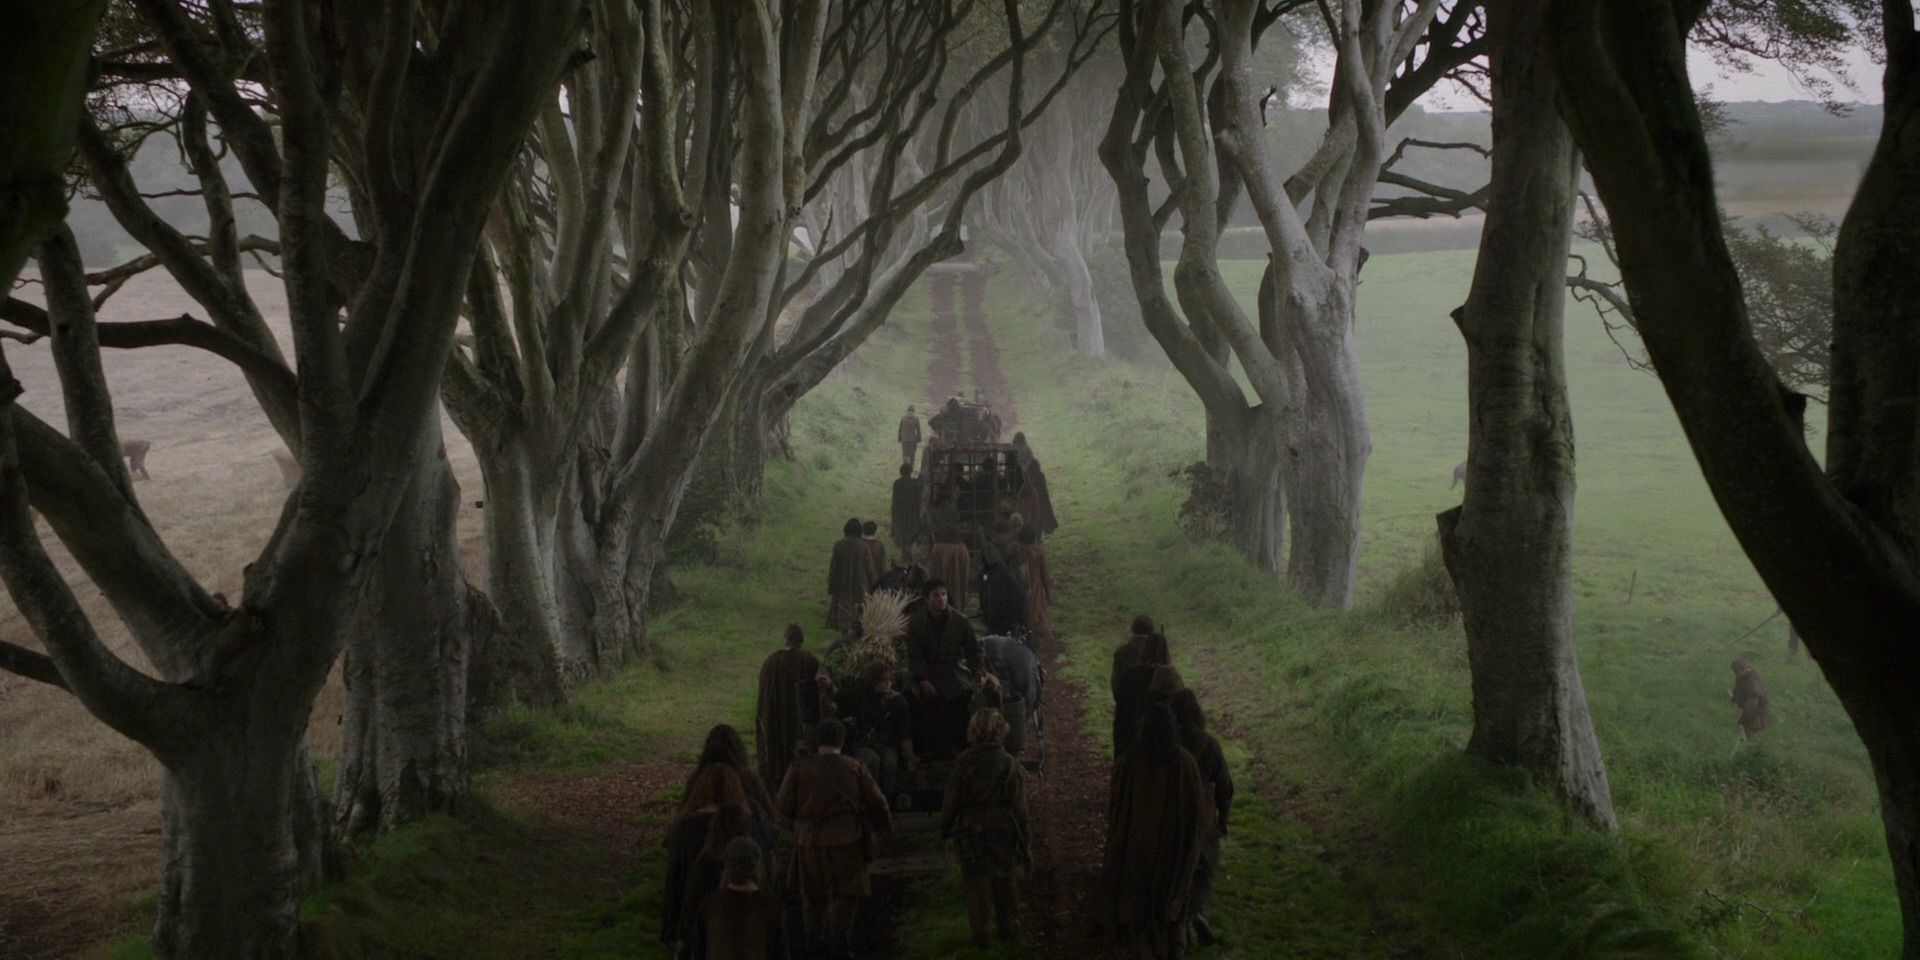 Filming location for the Kingsroad from Game of Thrones